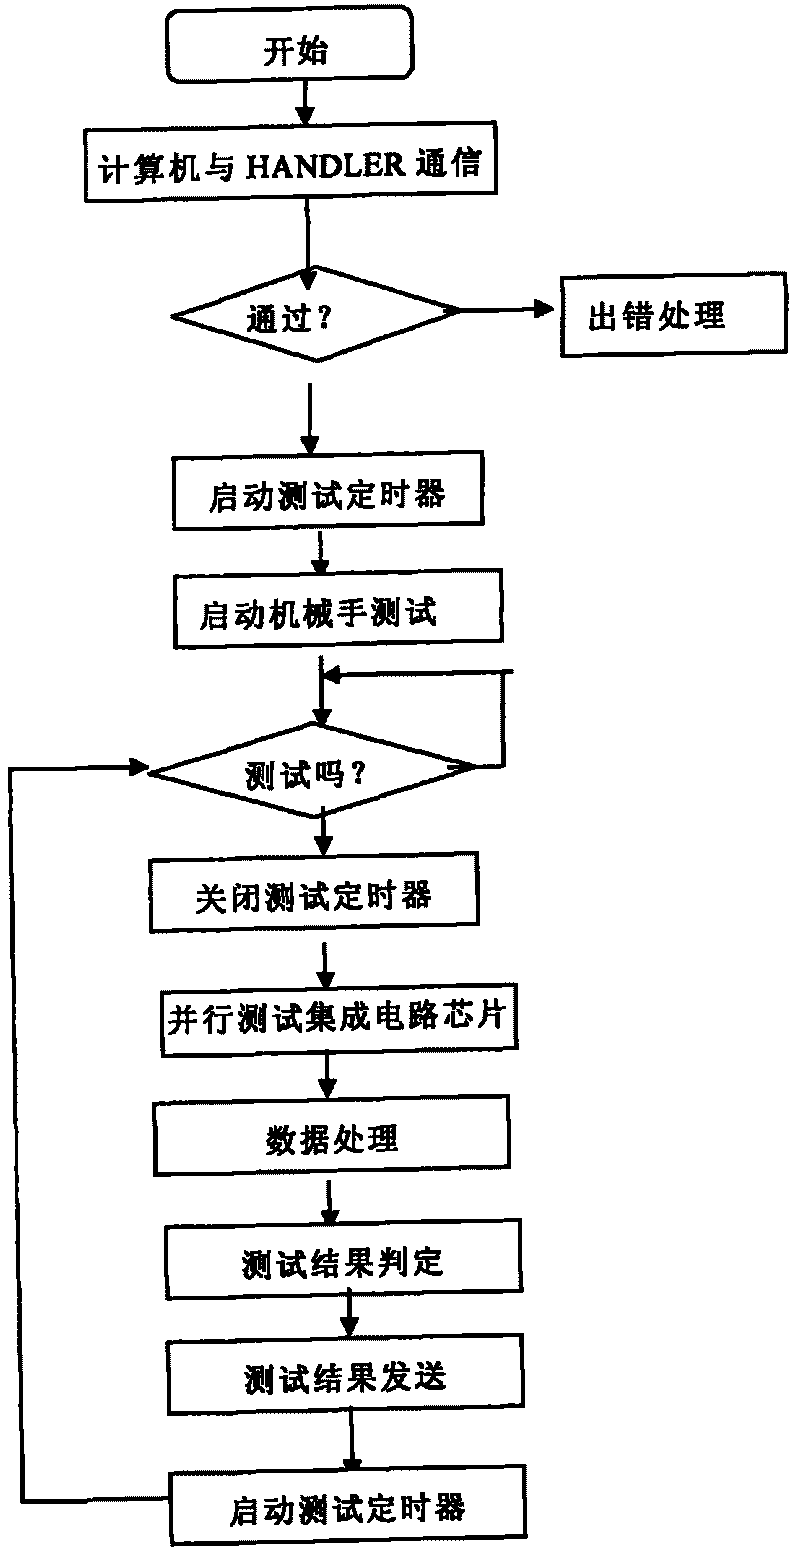 Automatic test system for integrated circuit board electrodes